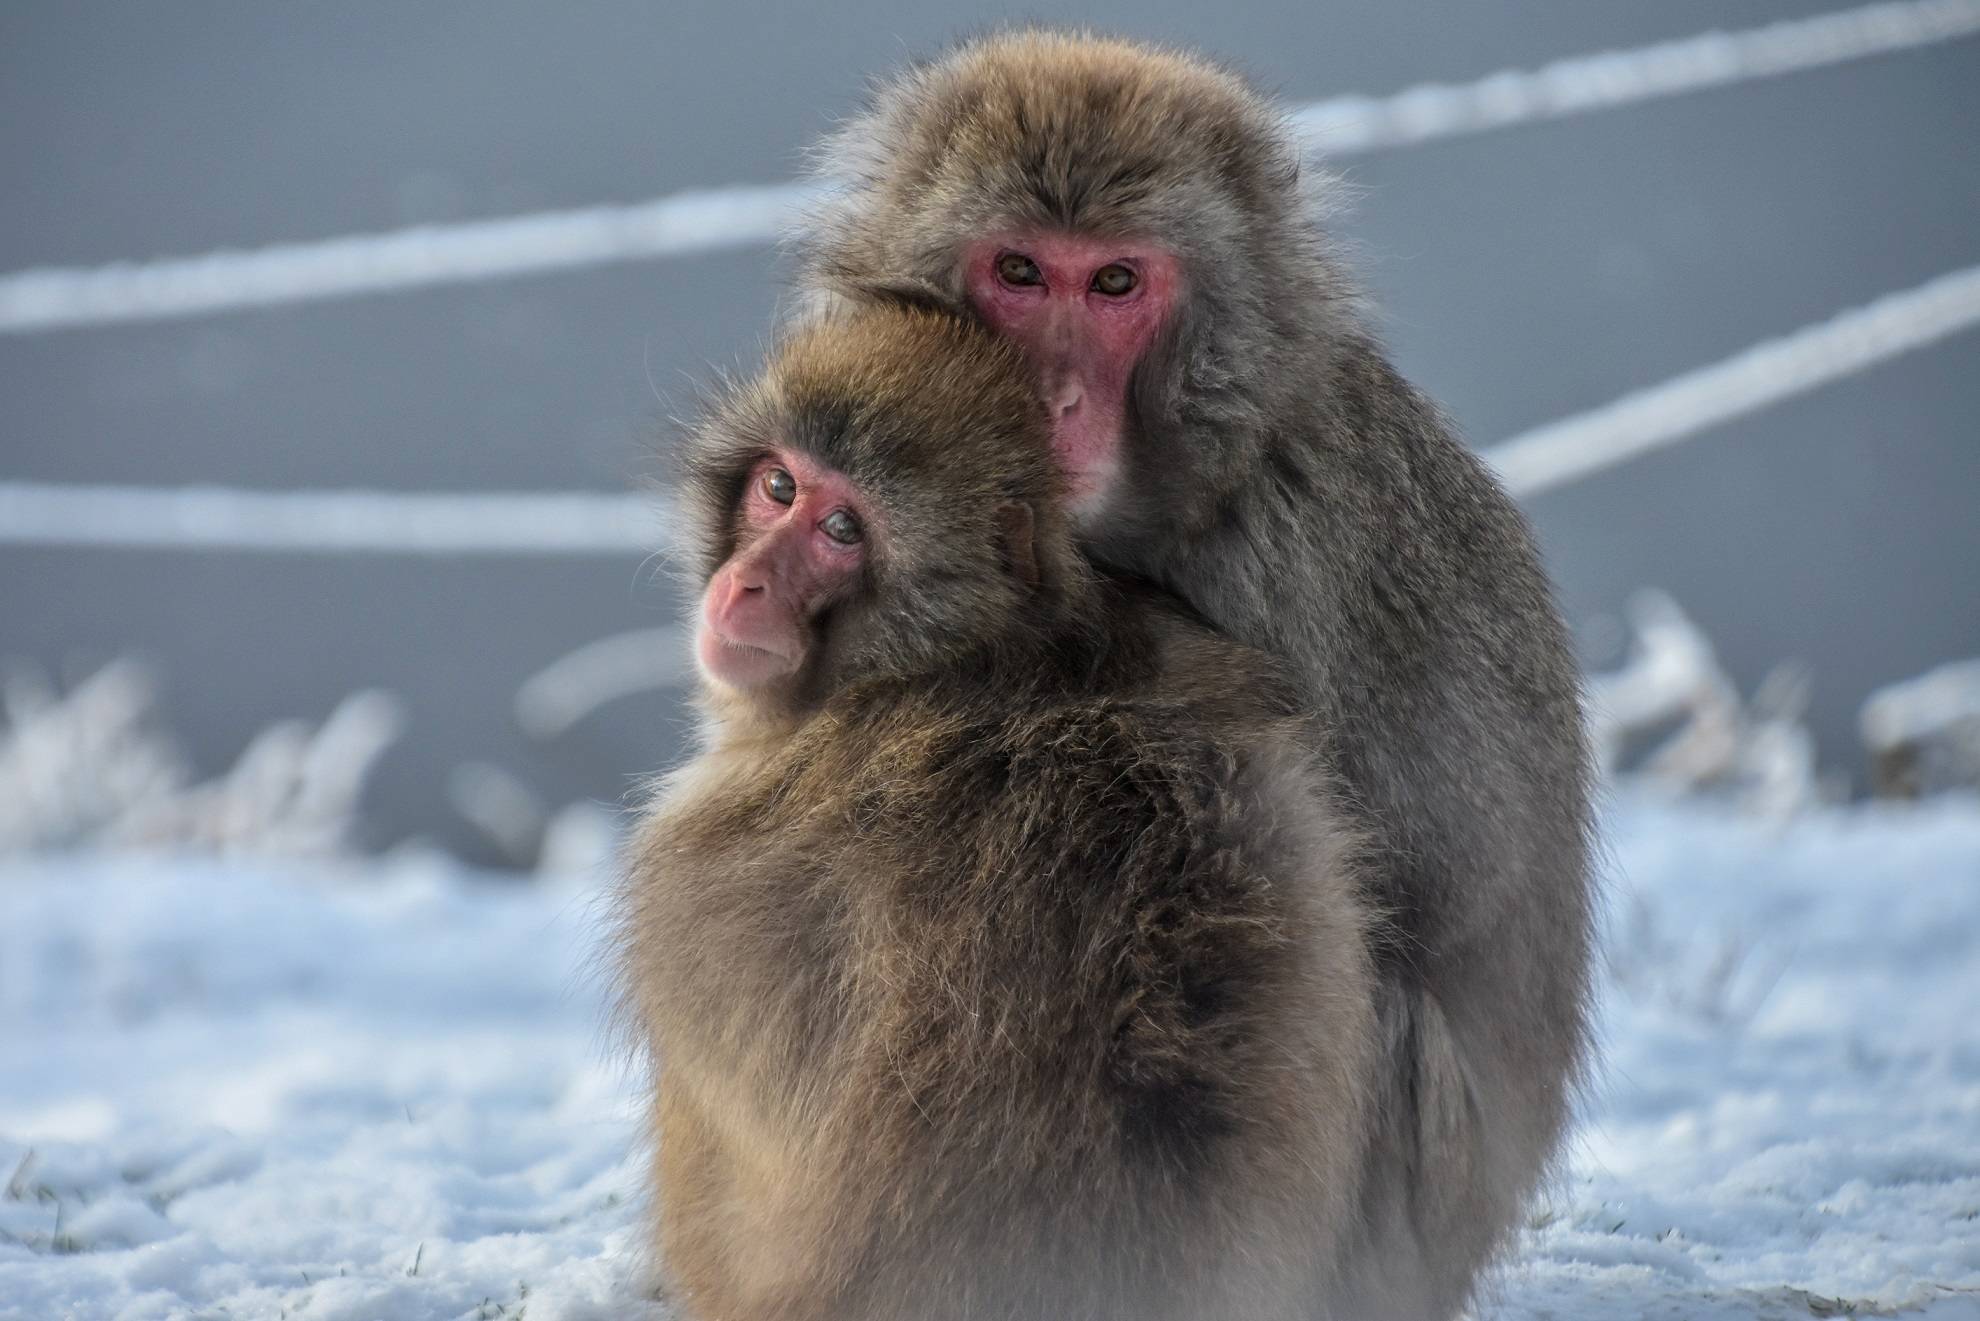 Two Japanese macaques cuddled together sitting in the snow IMAGE: Laura Moore 2020